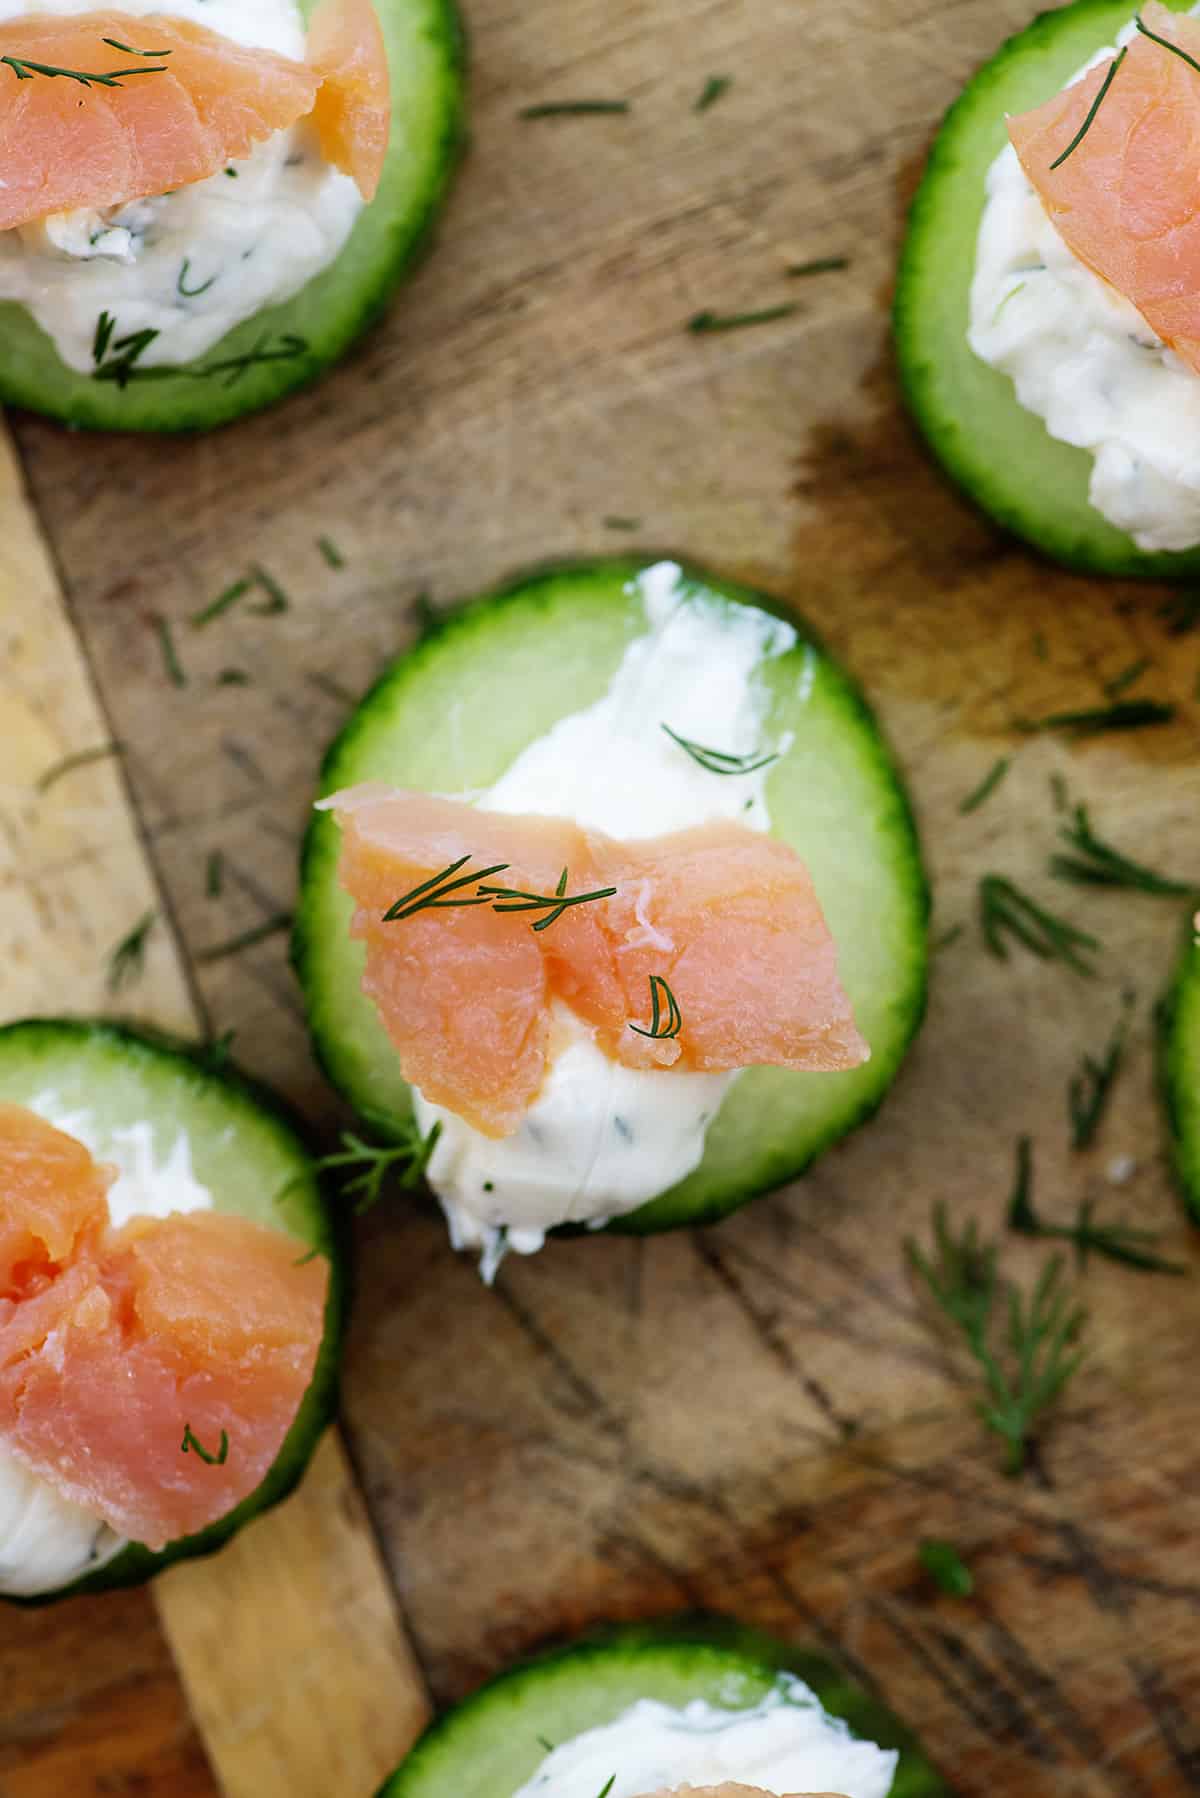 Smoked Salmon Appetizer with Cucumber and Lemon Dill Cream Cheese